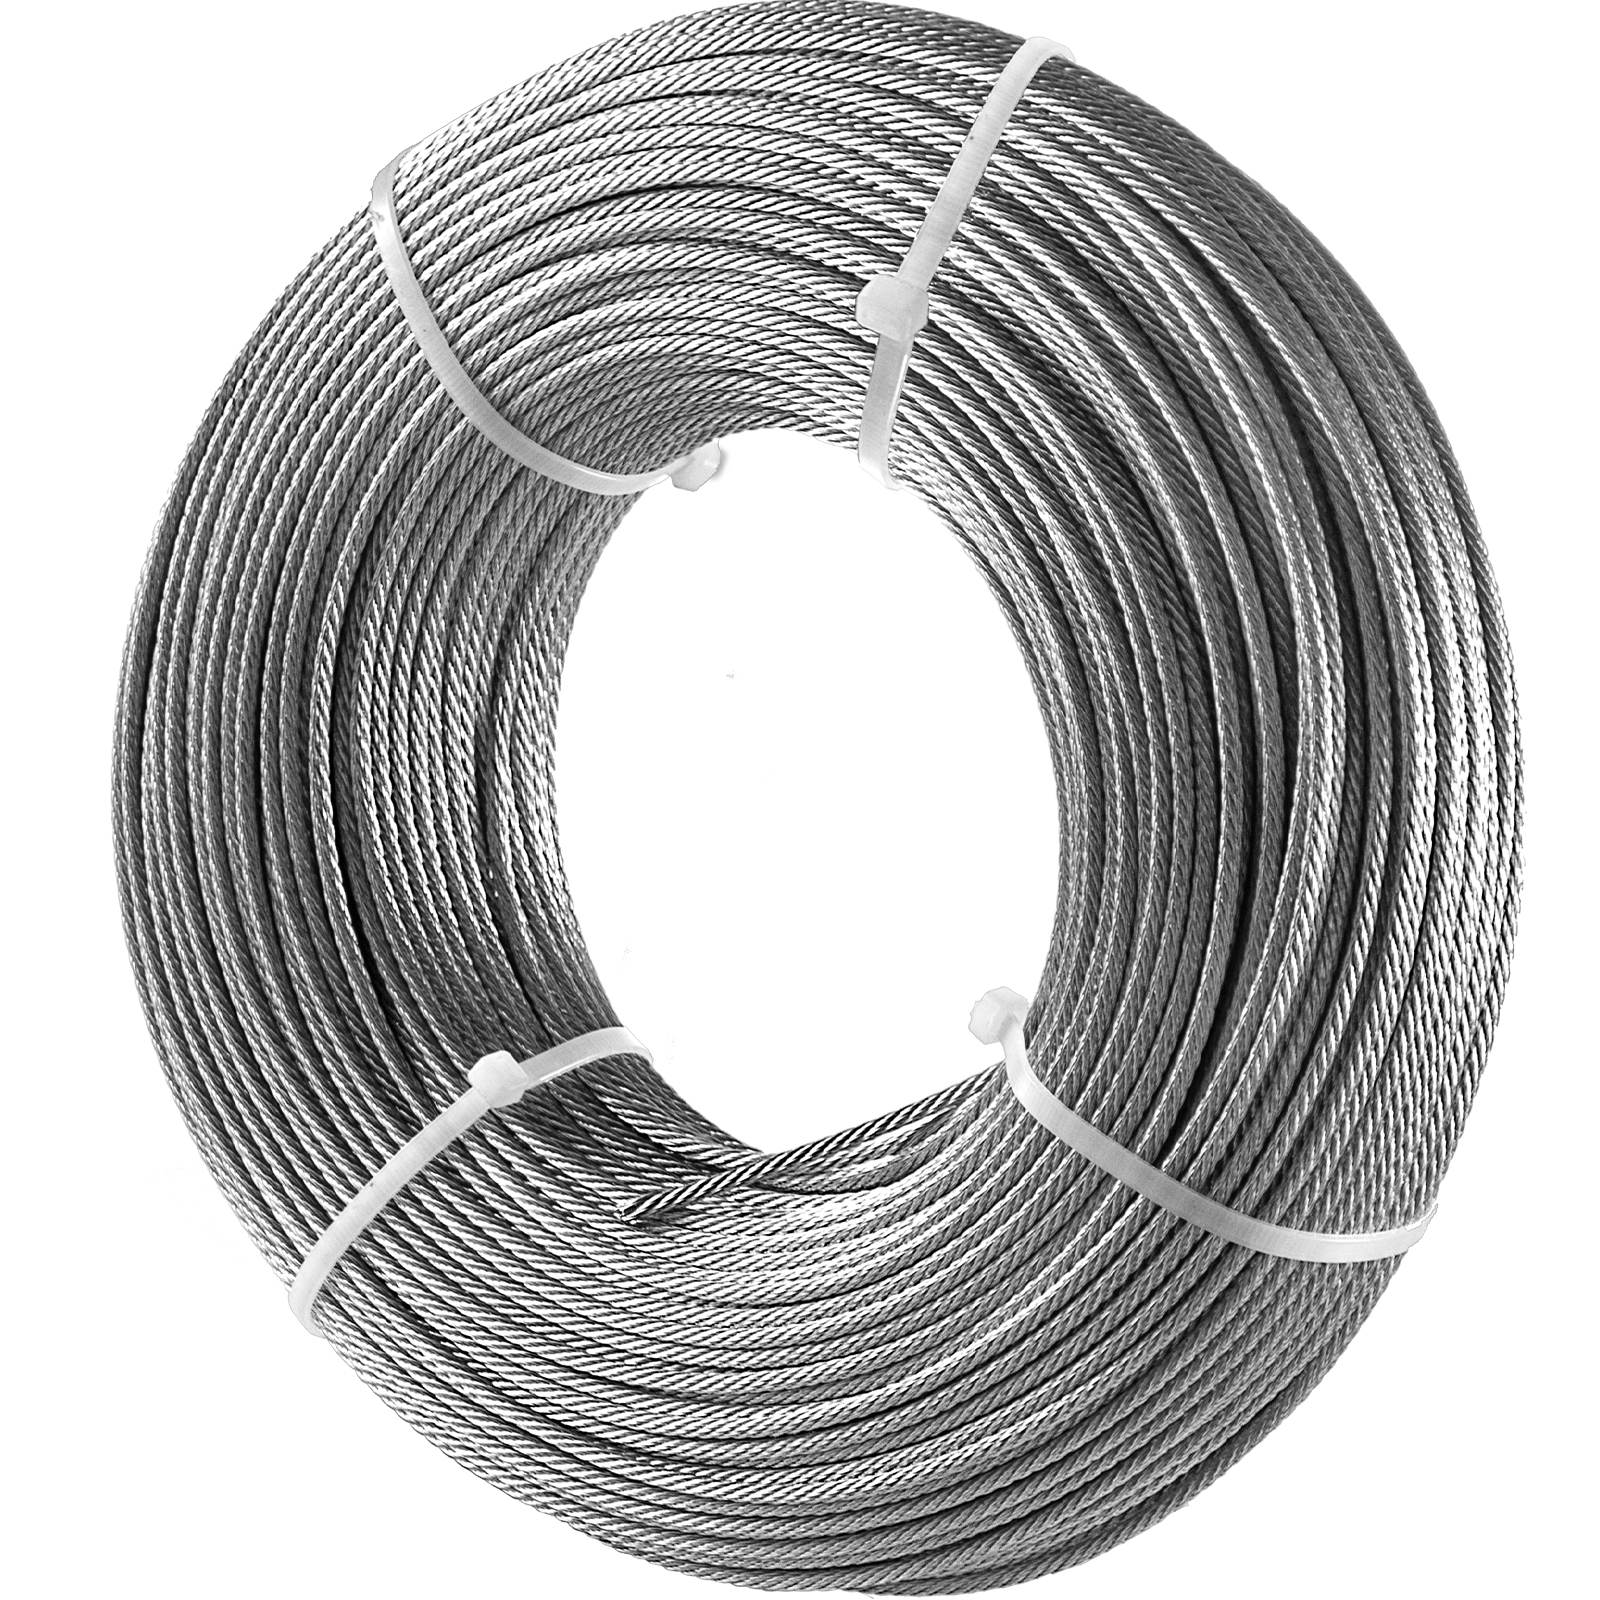 1*19 316 Stainless Steel Cable 100ft 1/8inch Wire Rope от Vevor Many GEOs